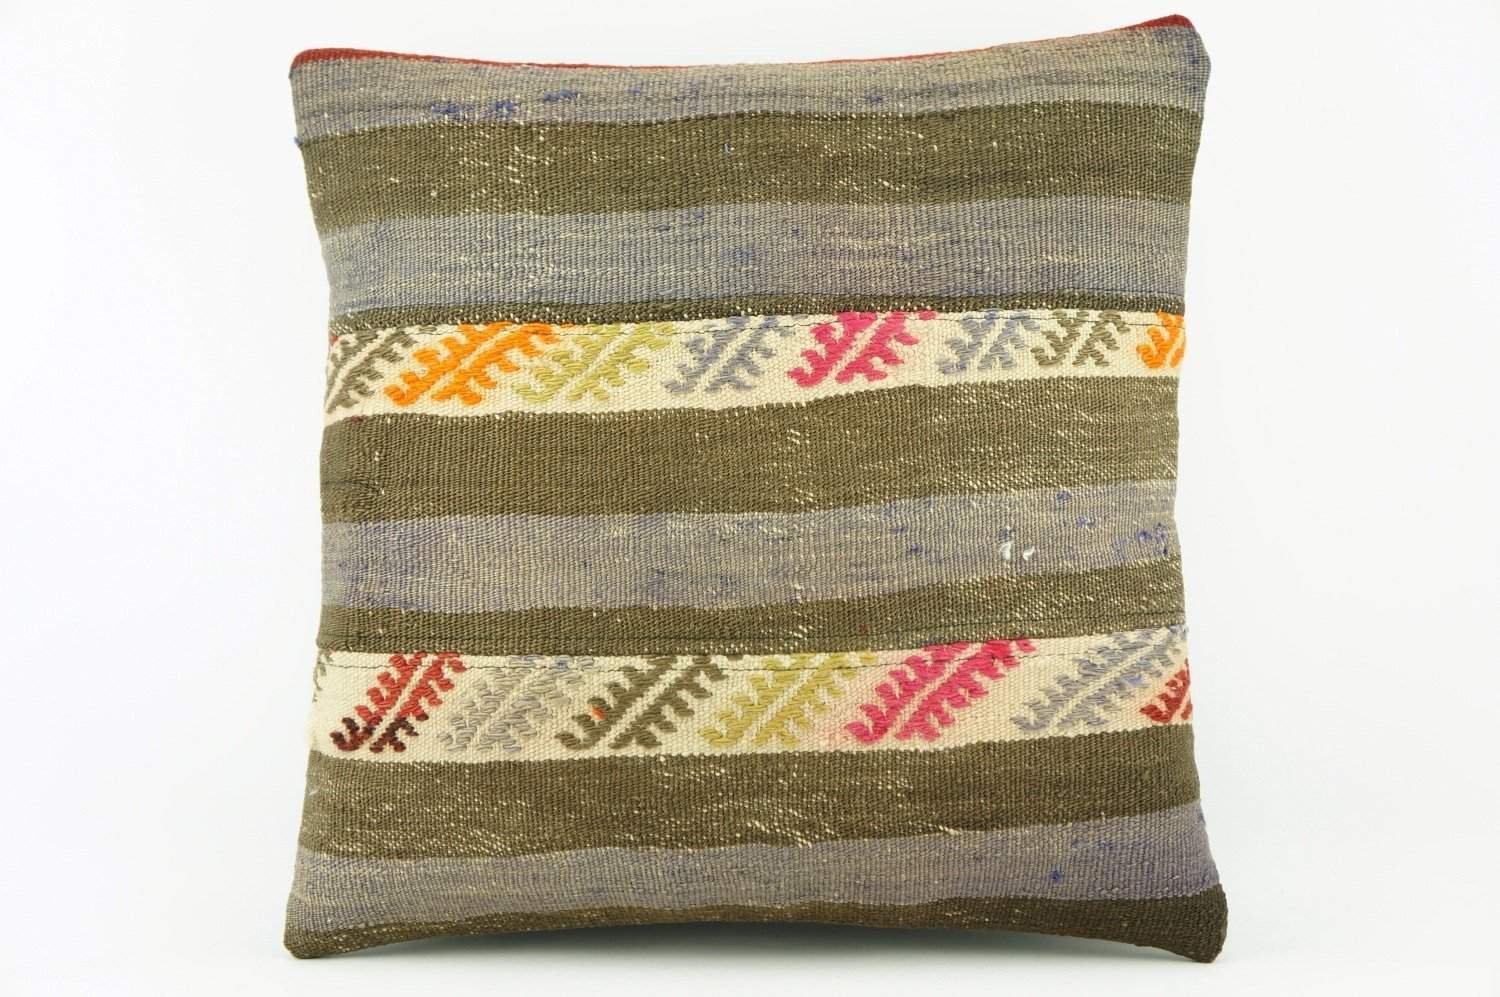 Gray and green  Kilim  pillow cover, old  pillow, ethnic  pillow , Outdoor pillow   2133 - kilimpillowstore
 - 1